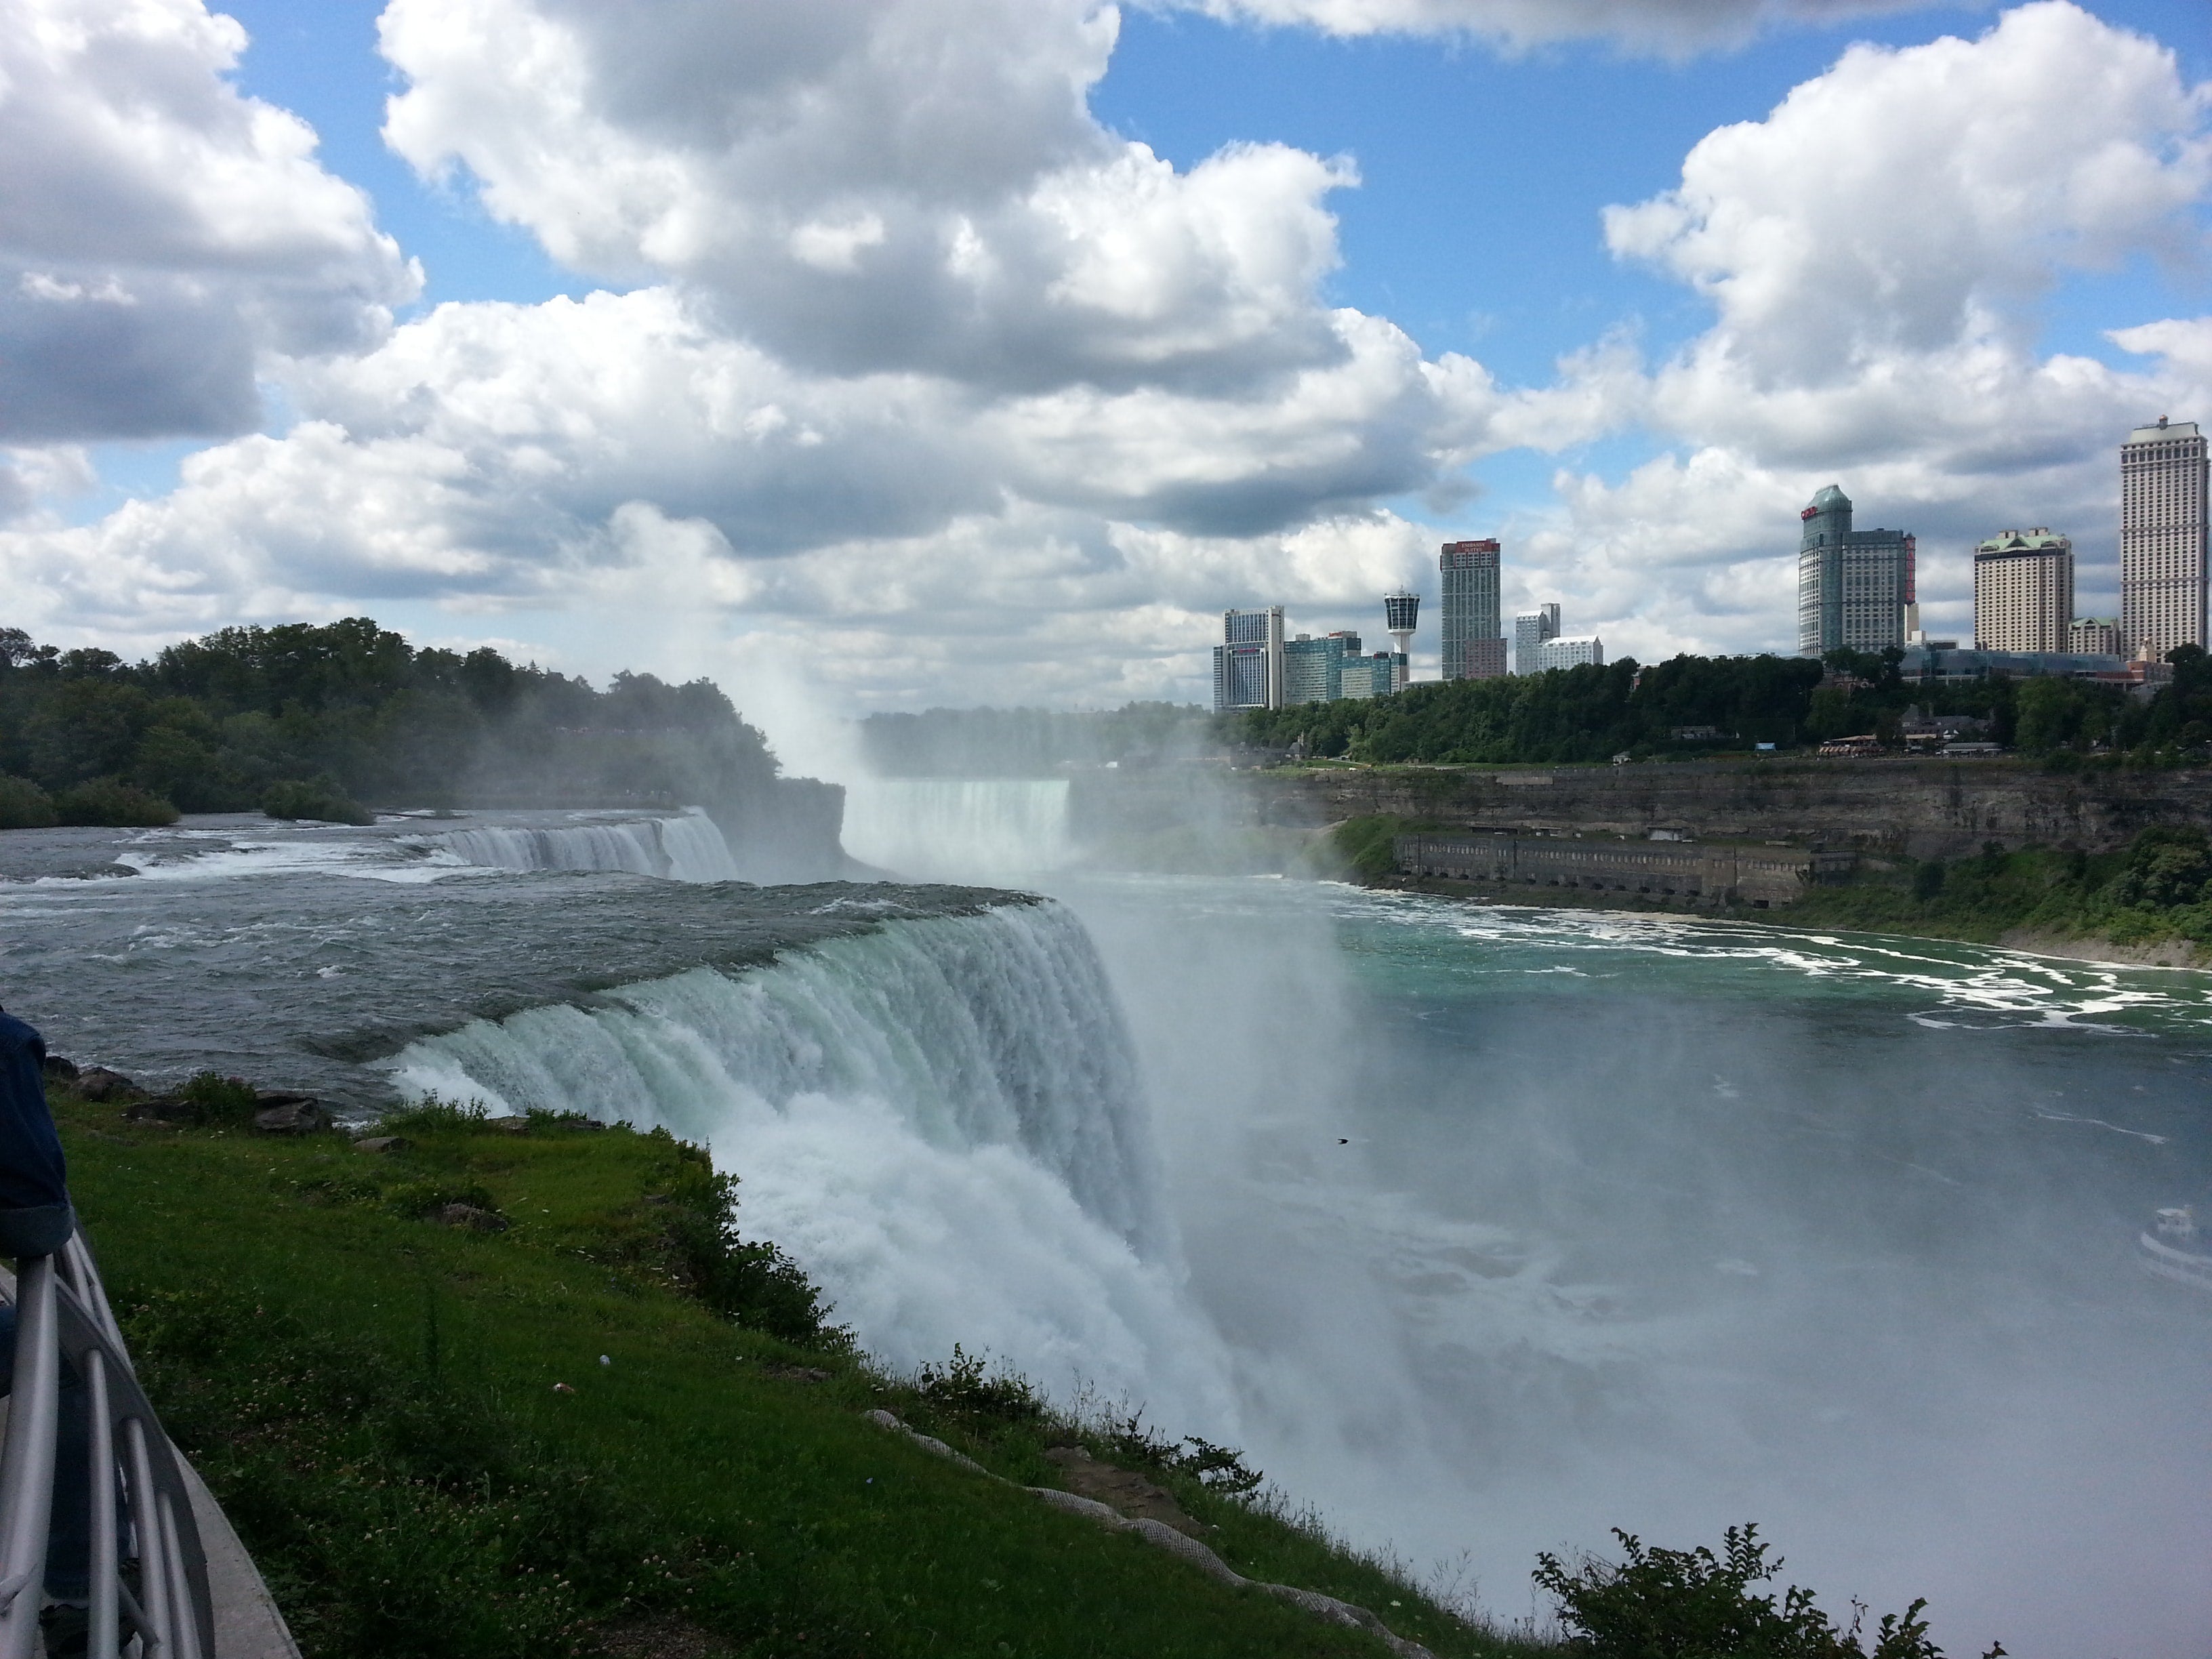 You can ride your e-bike to Niagara Falls, pictured here from the New York side, looking across the water to Ontario, Canada